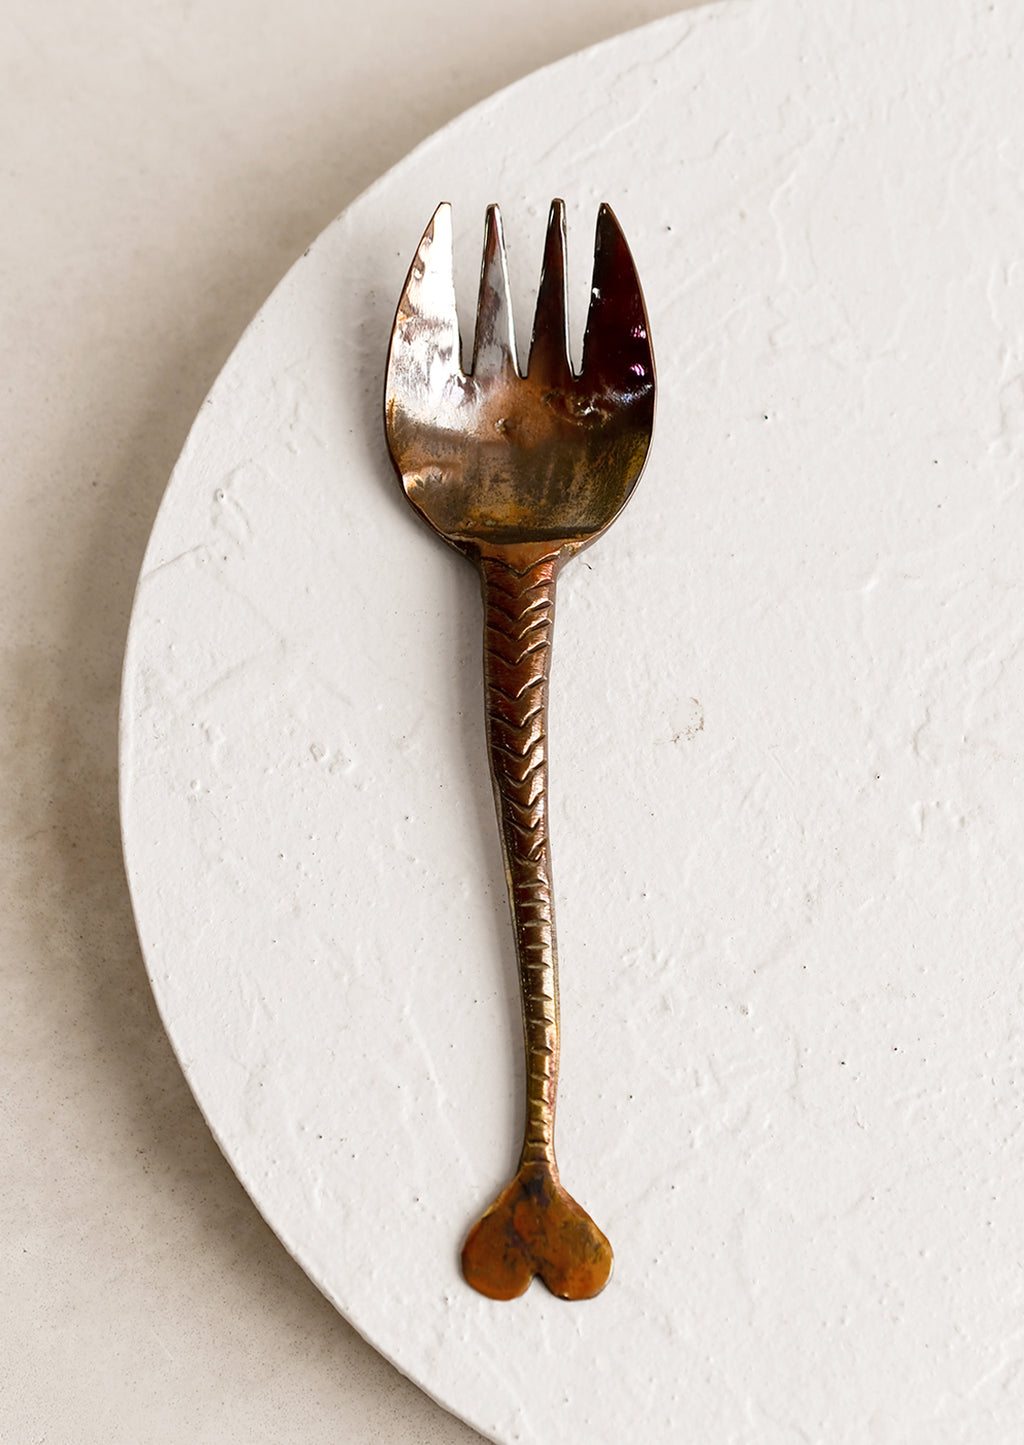 Fork: A copper fork with fish tail handle and oxidized finish.